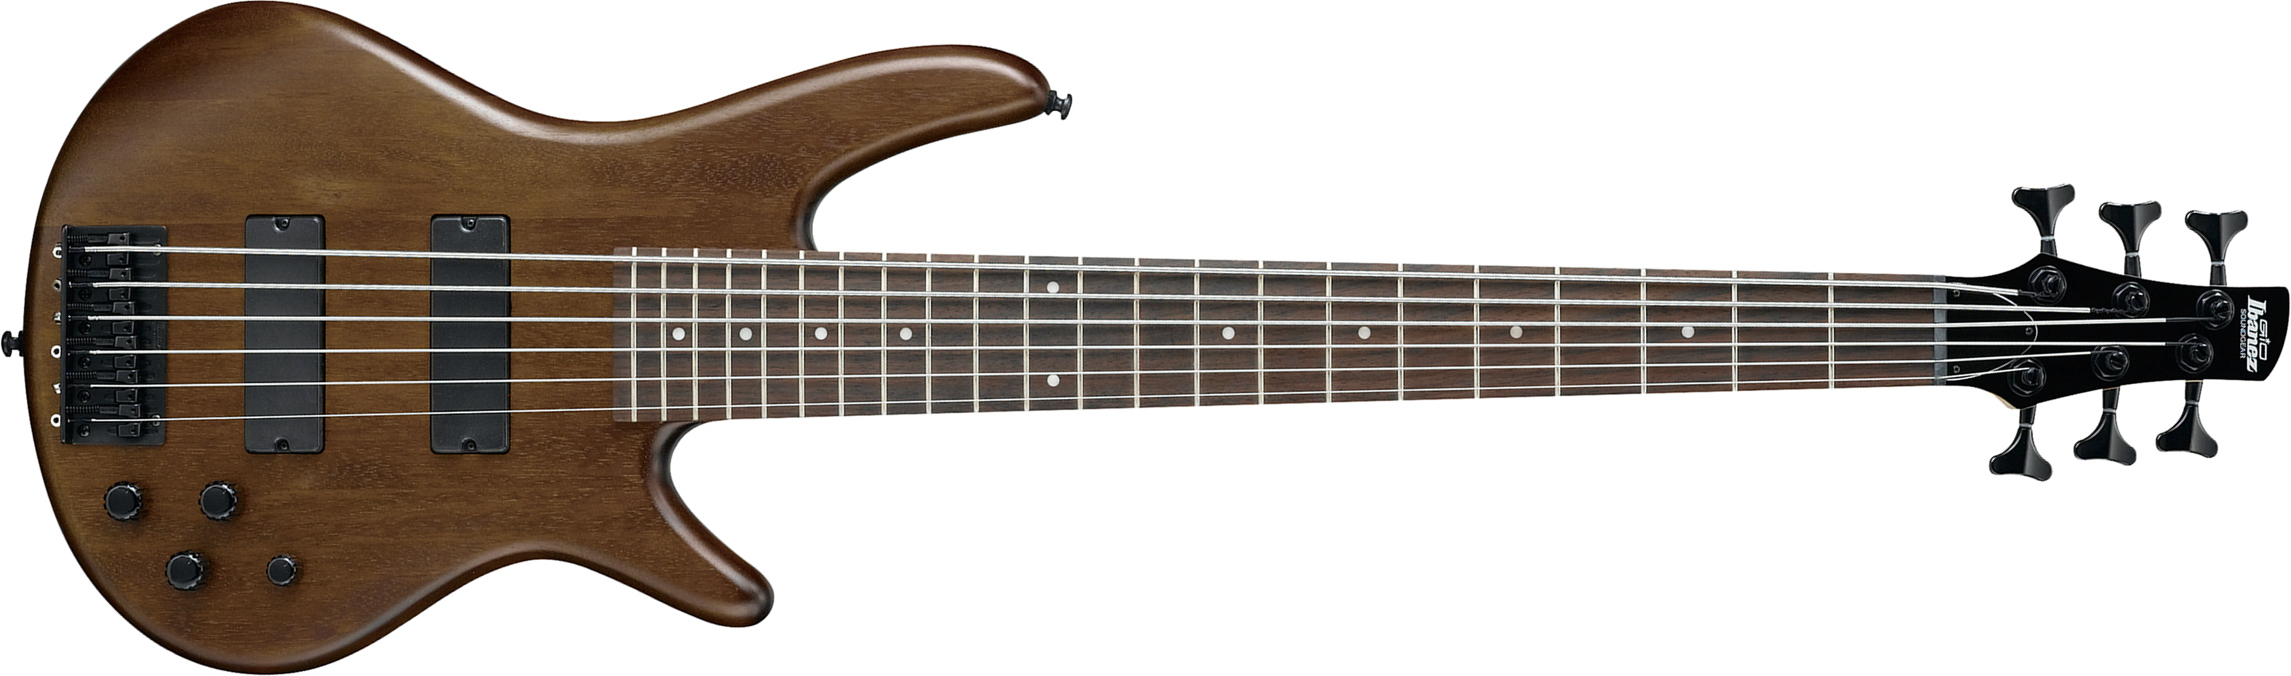 Ibanez Gsr206b Wnf Gio 6c Active Jat - Walnut Flat - Solid body electric bass - Main picture